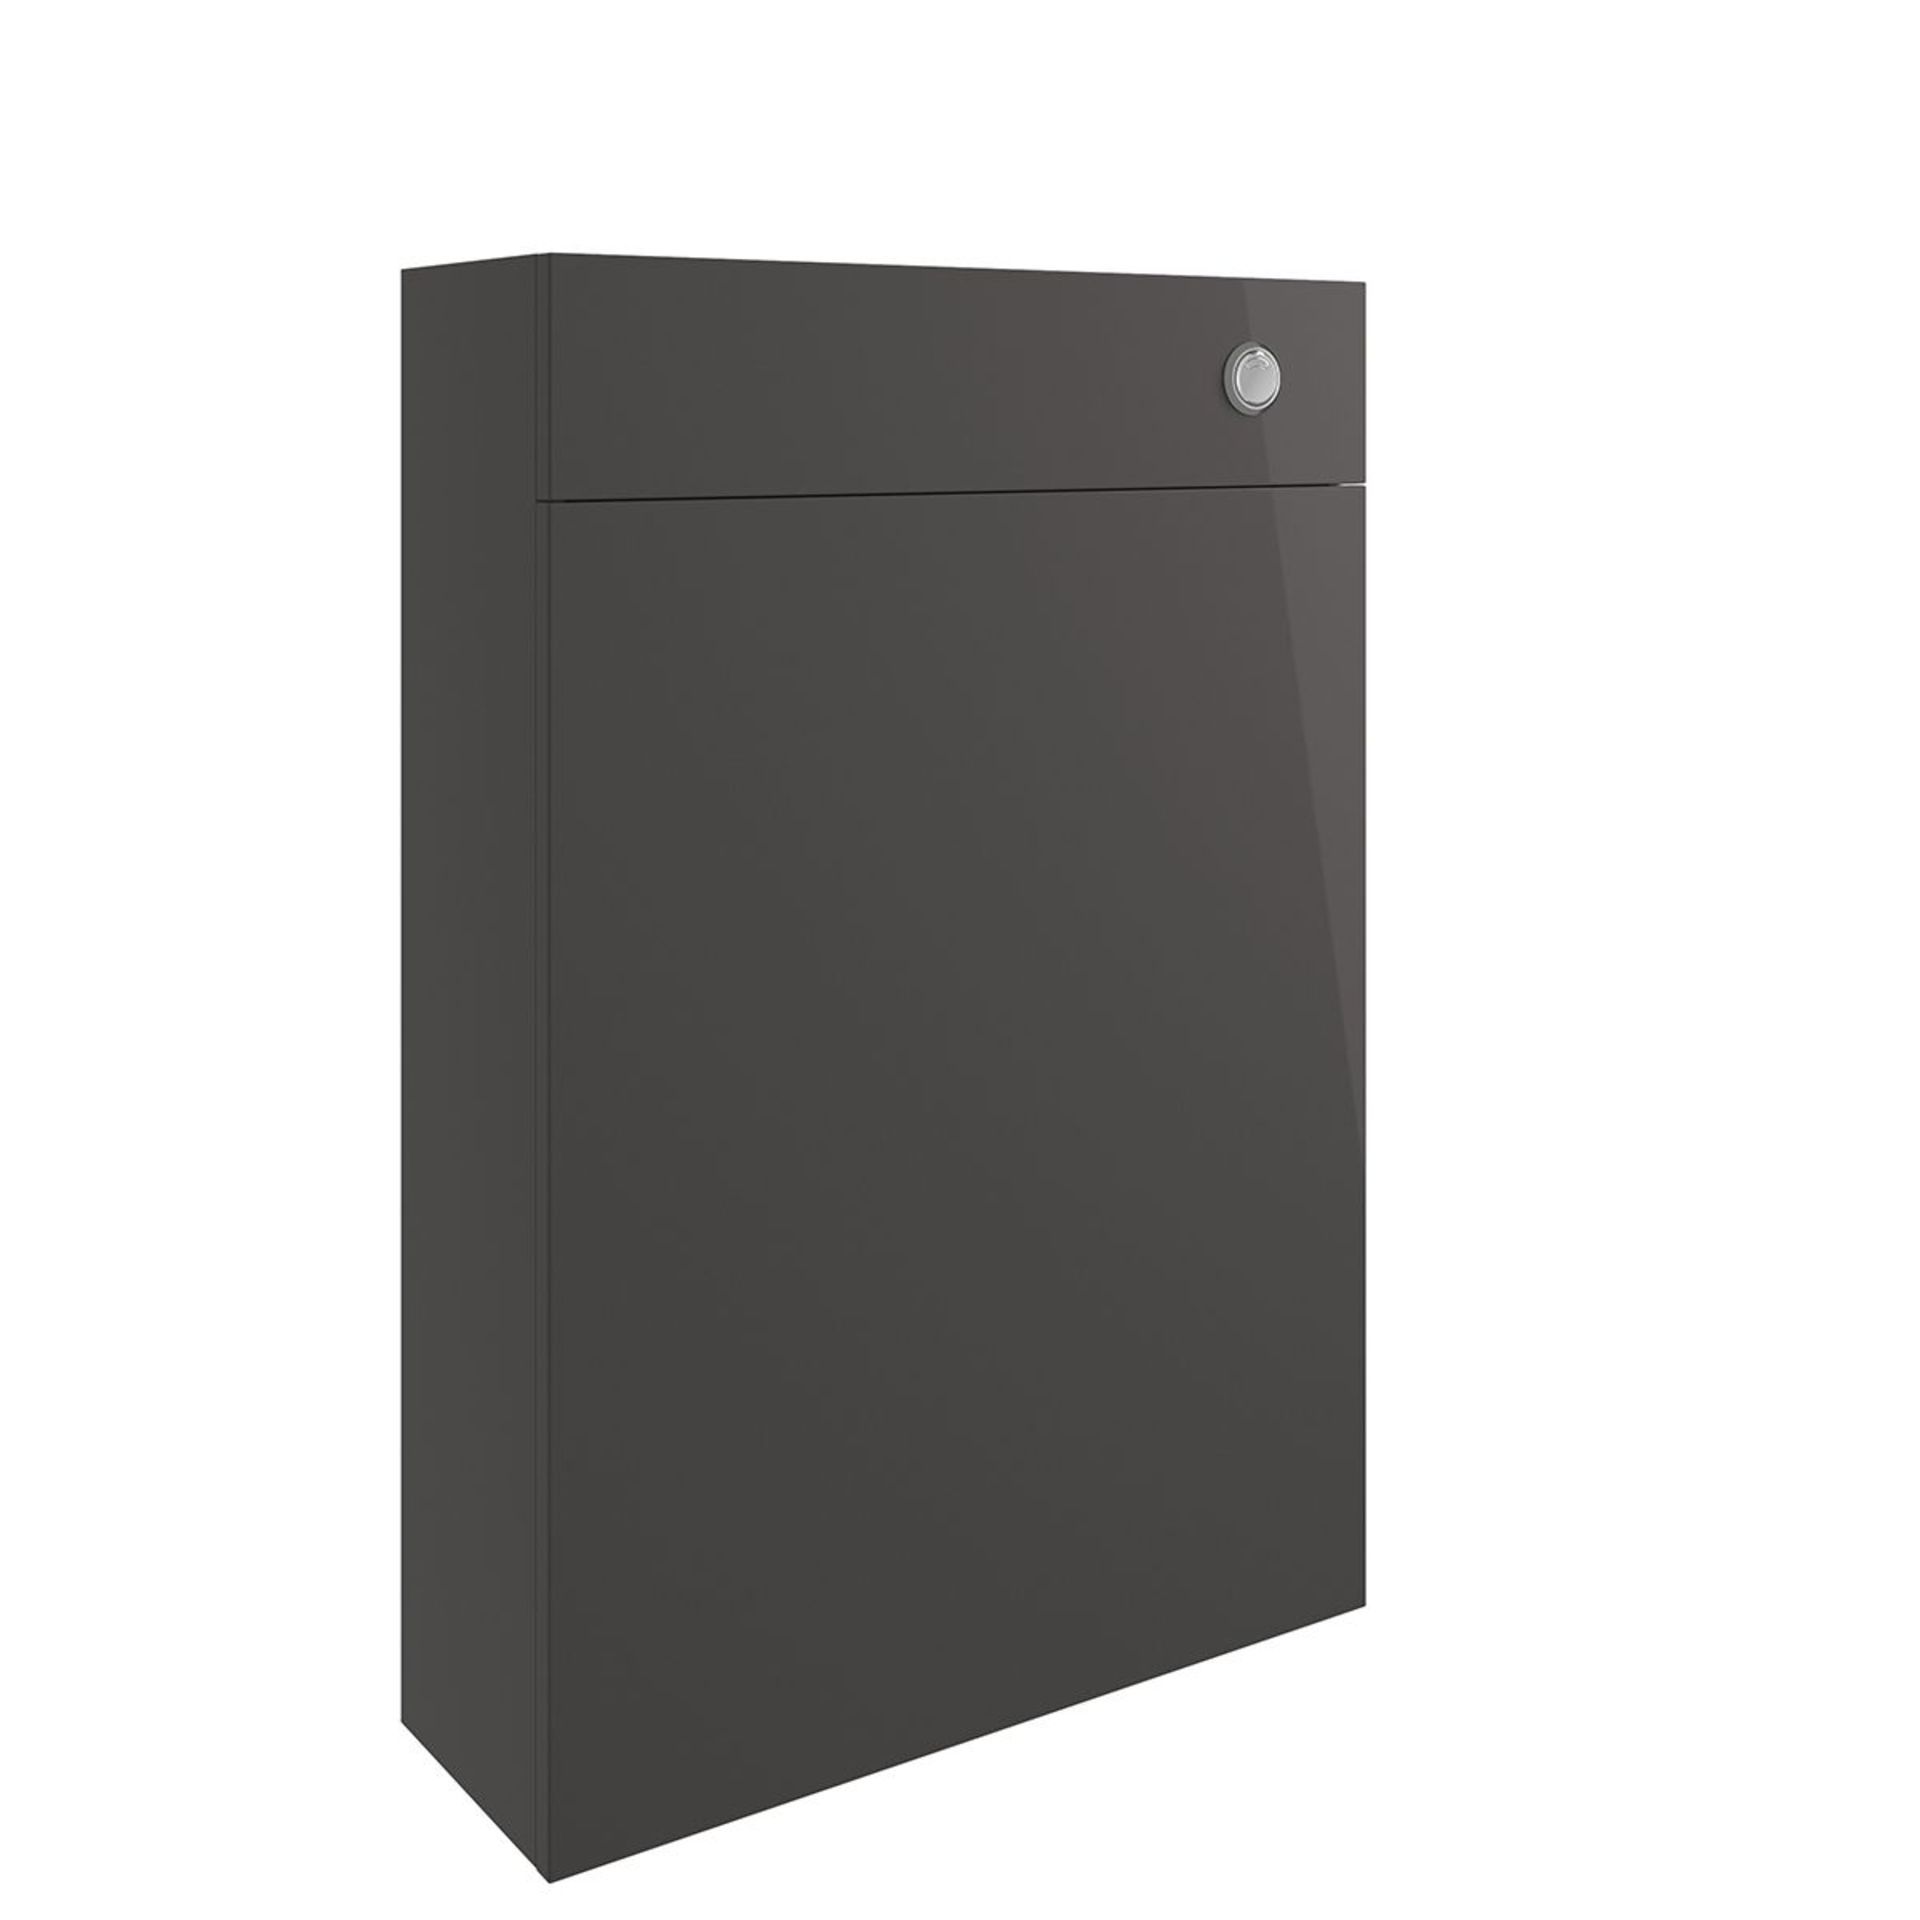 New (Y105) Onyx Grey Gloss Slim WC Unit 600mm. RRP £355.00.Durable 18mm Cabinet, Sides And Ba... - Image 2 of 2